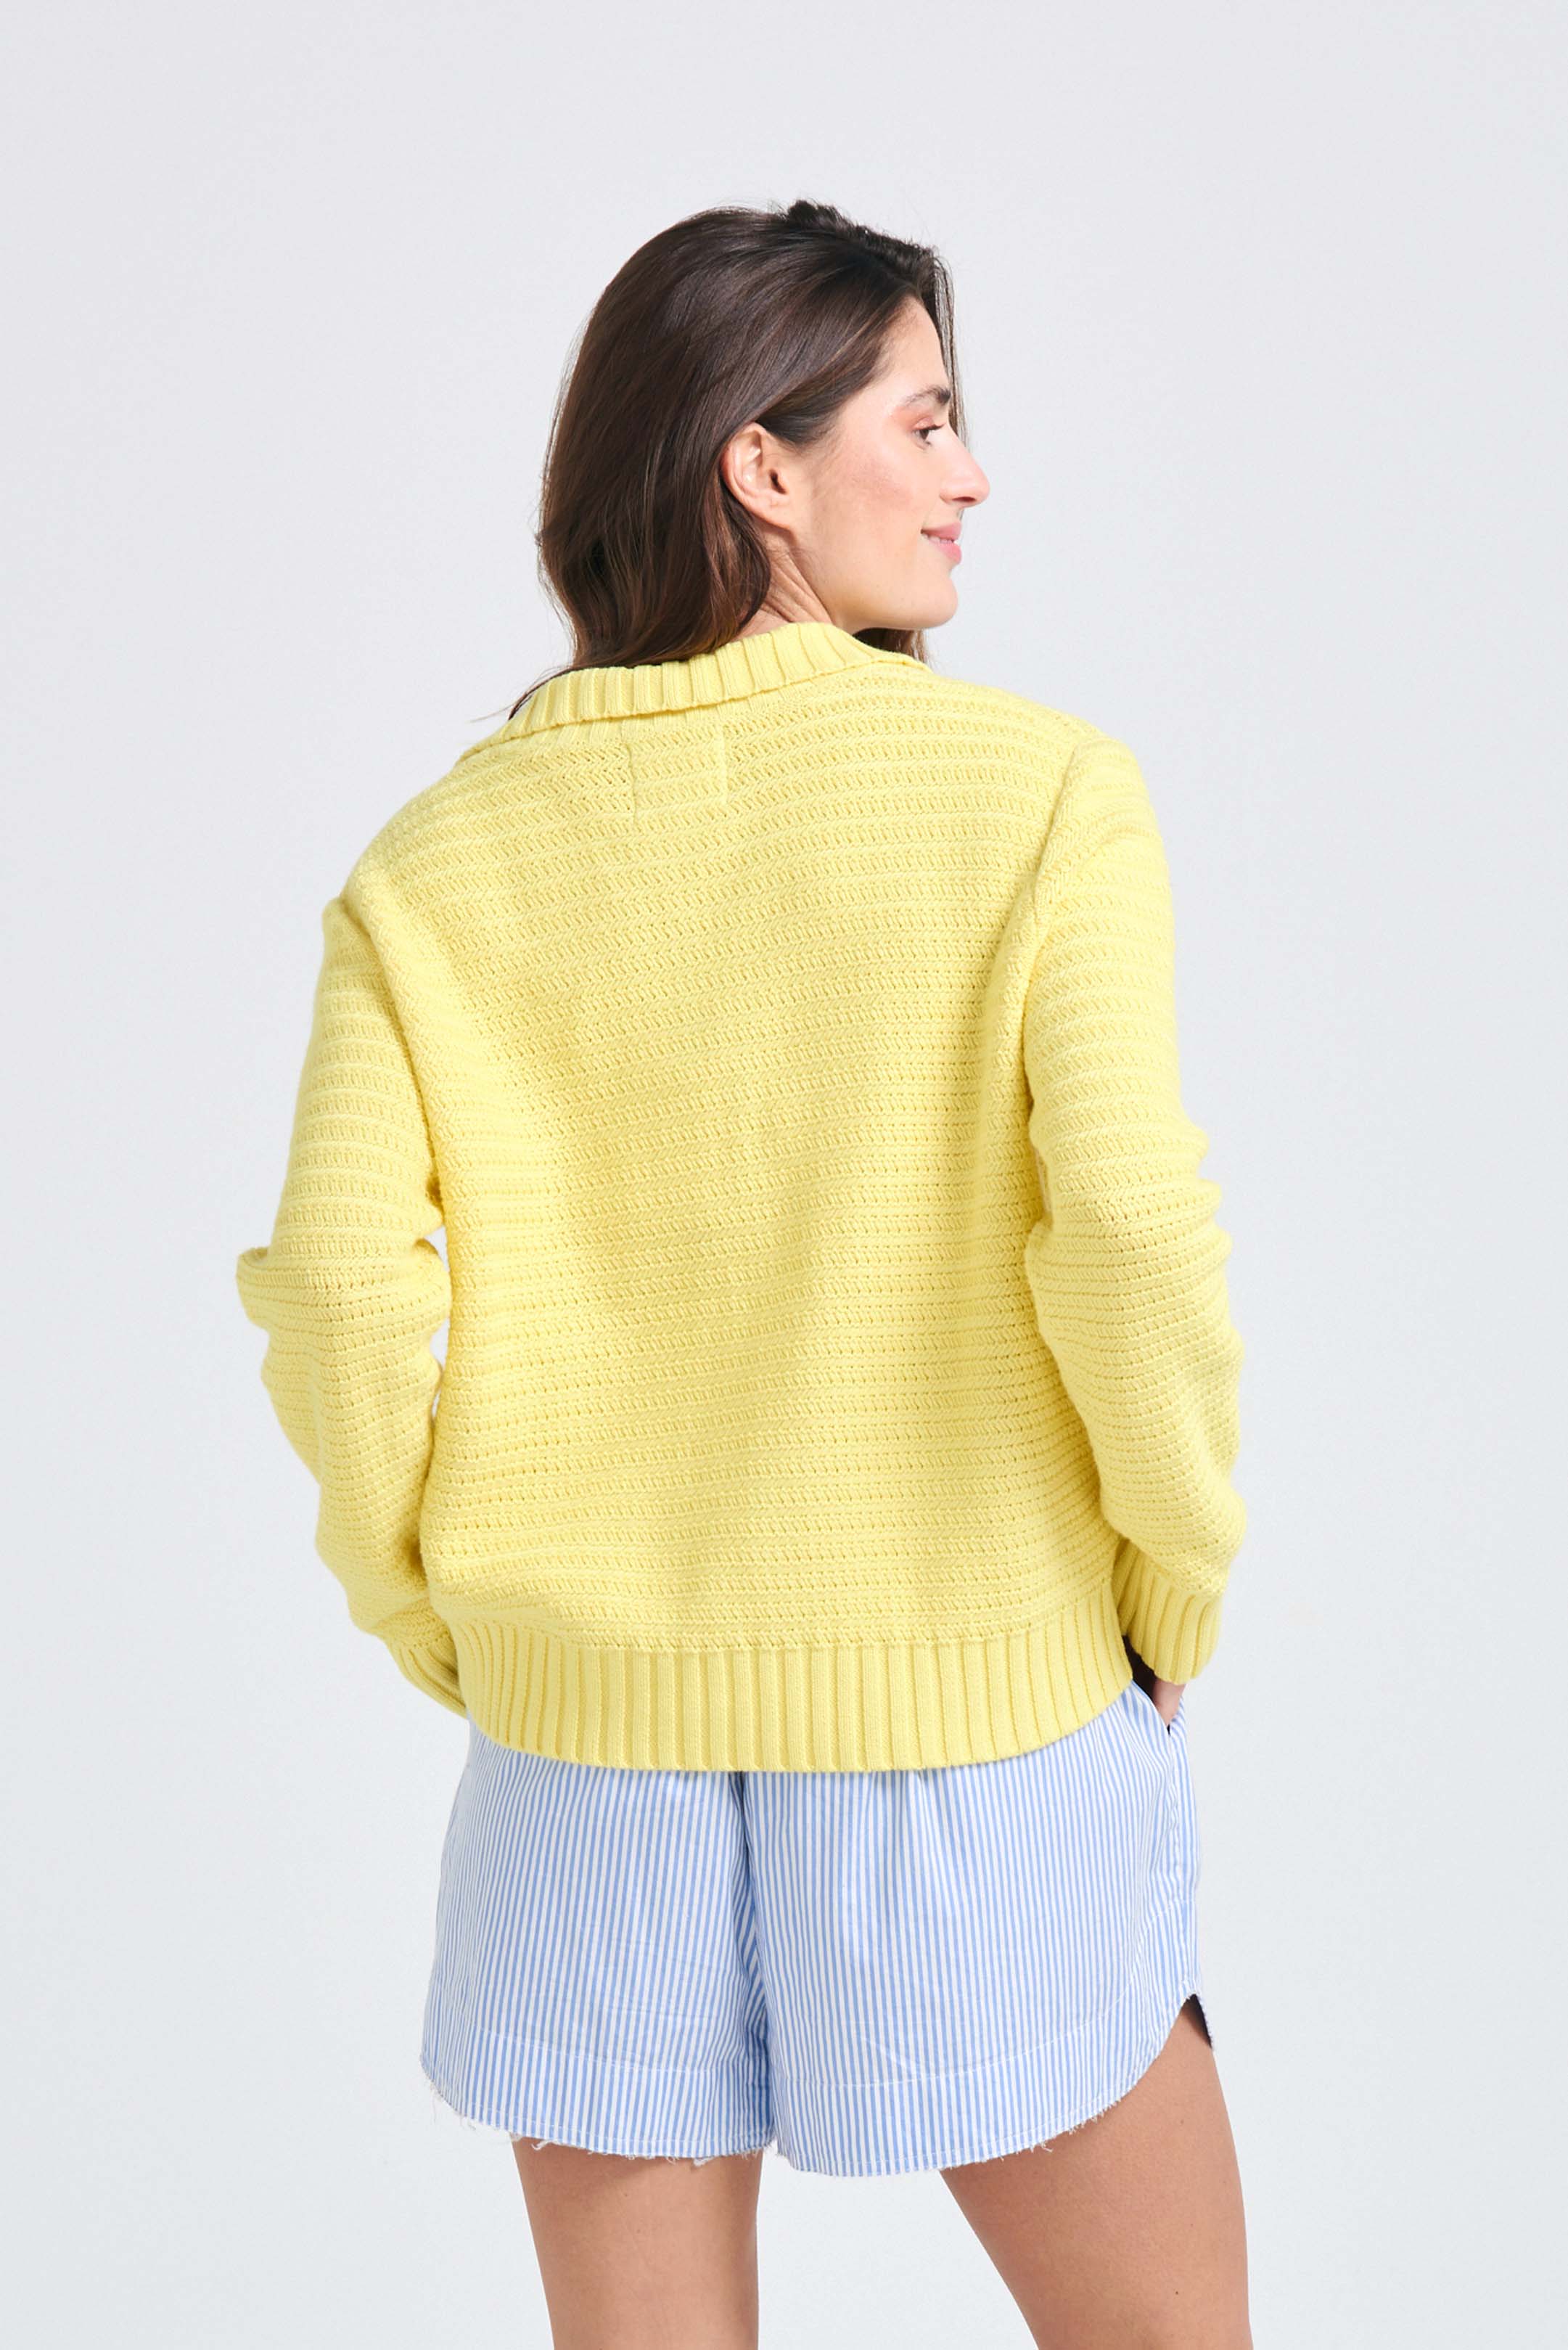 Brown haired female model wearing Yellow cotton jumper with a collar in a fabulous all over herringbone stitch facing away from the camera